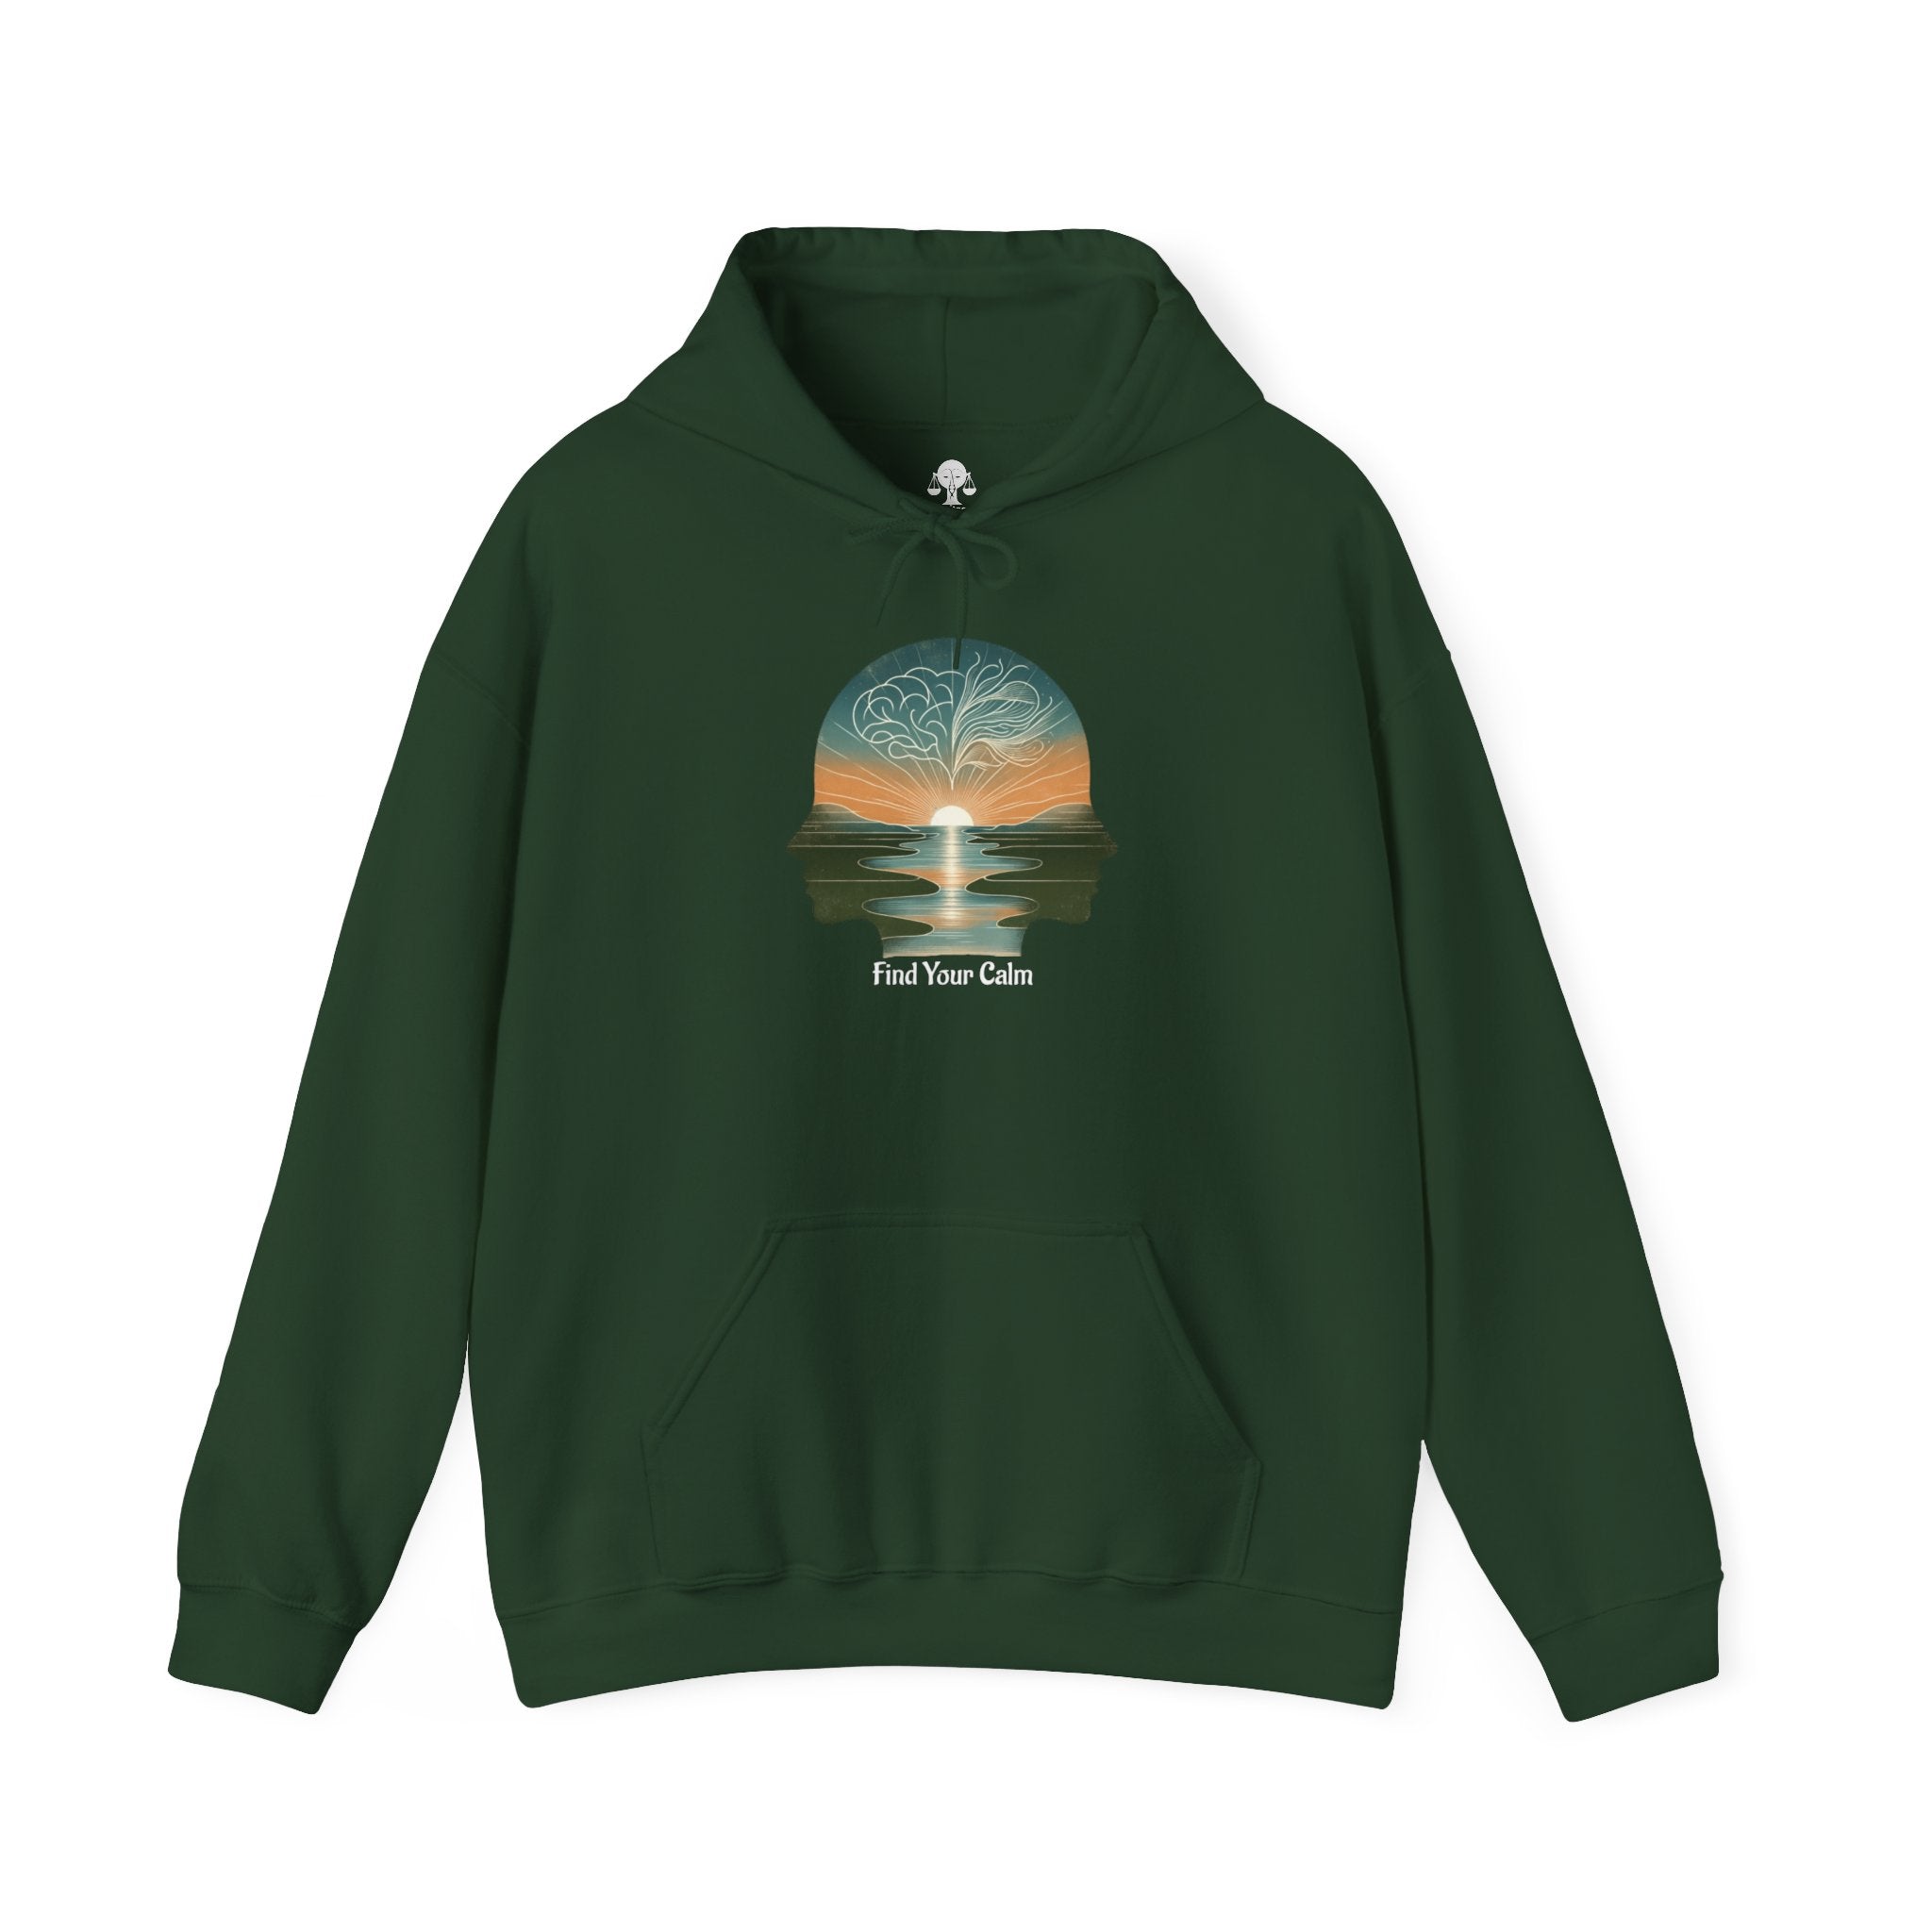 Find Your Calm Hoodie